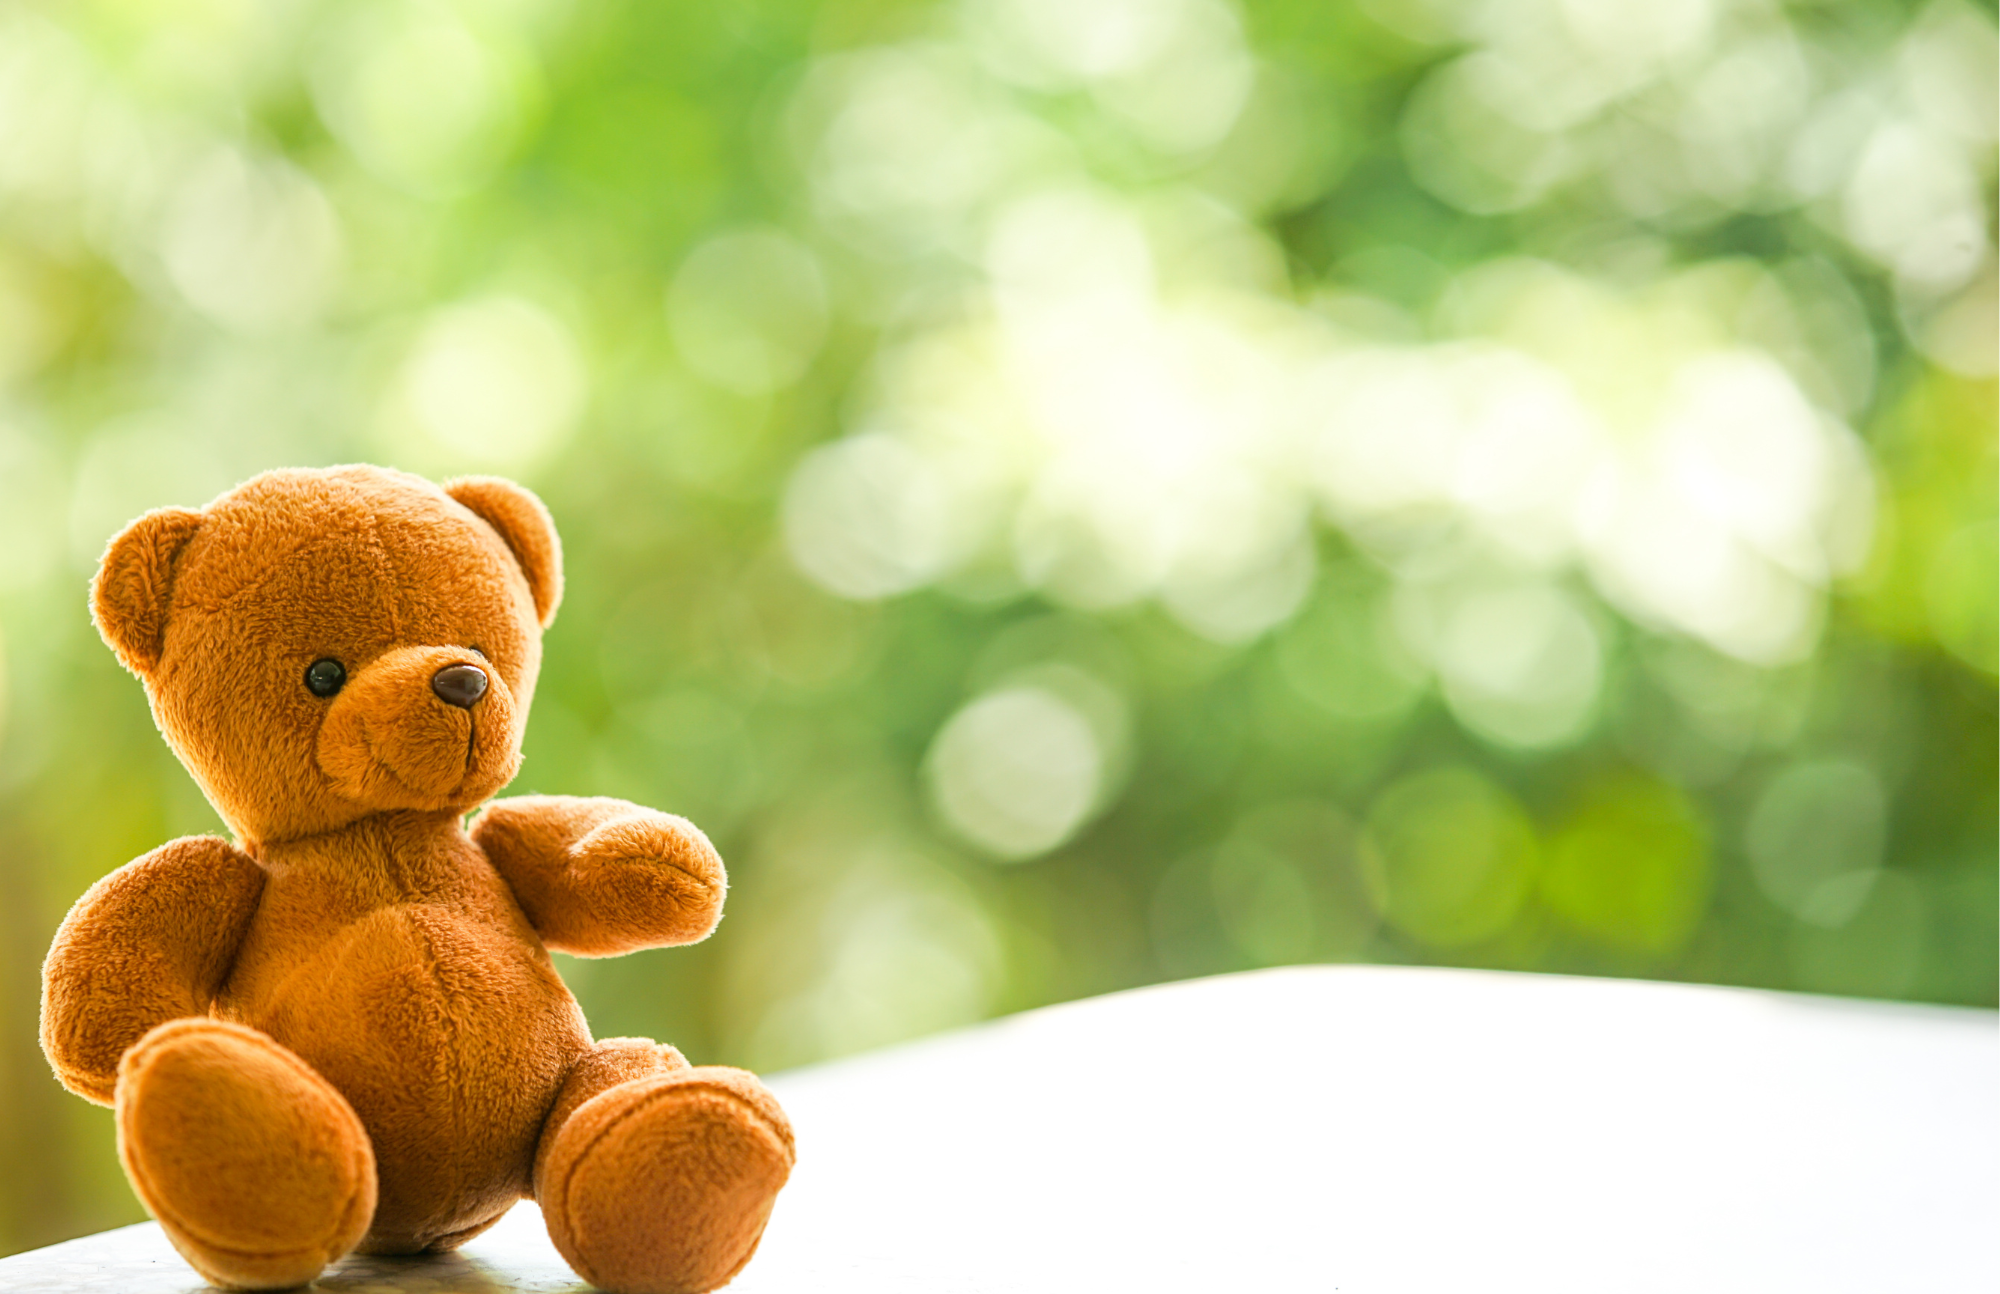 Brown teddy bear in front of green background